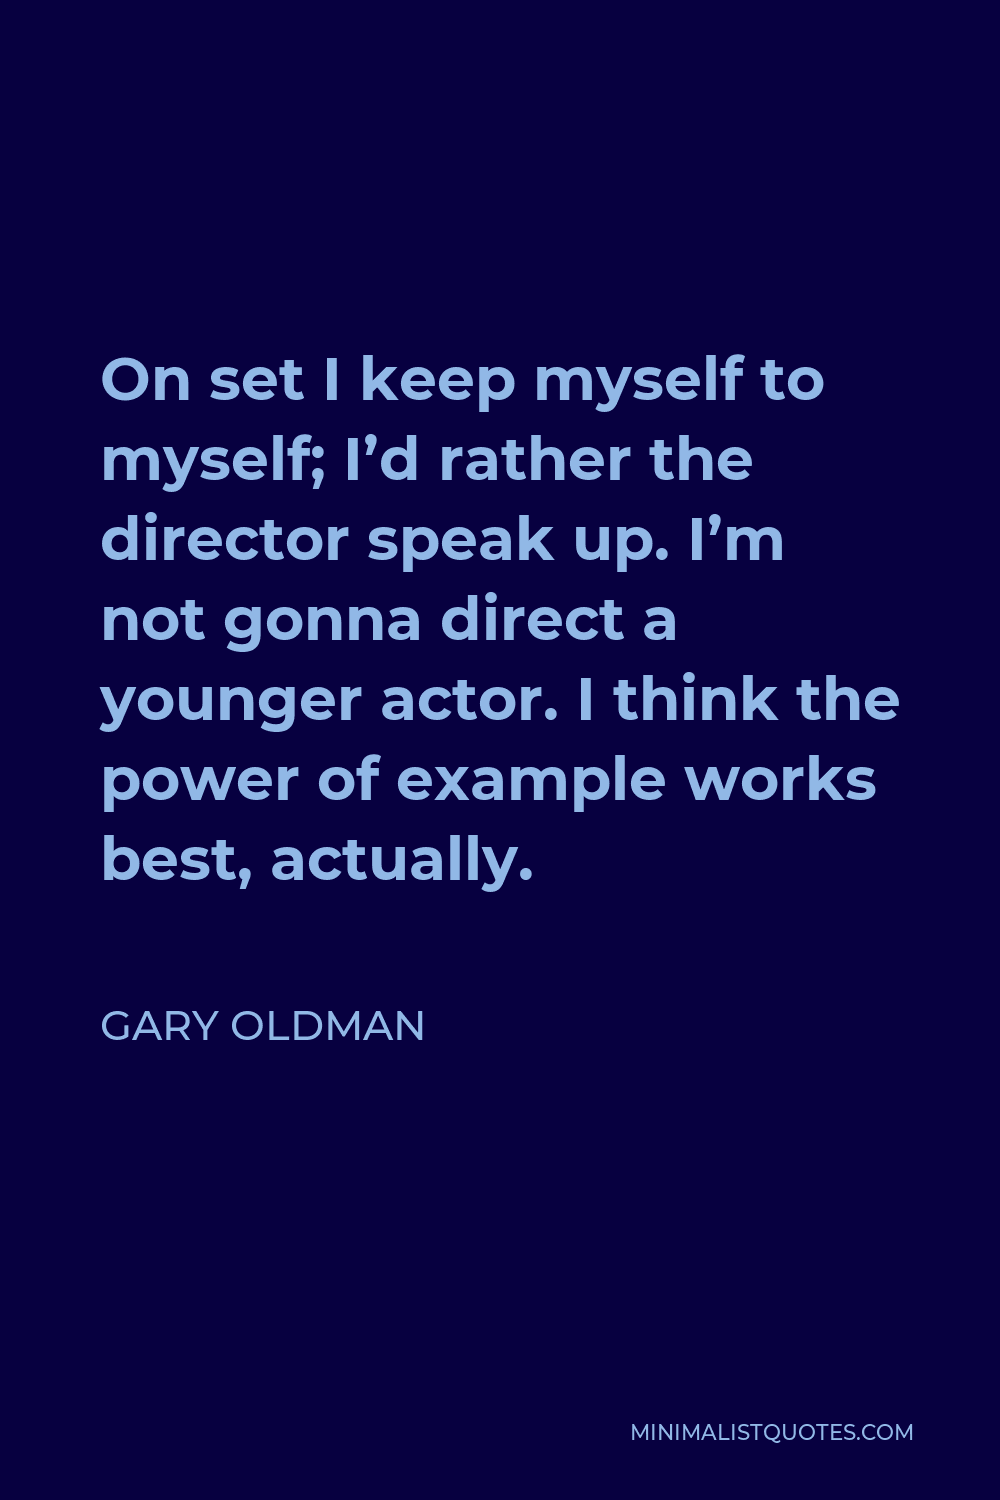 Gary Oldman Quote - On set I keep myself to myself; I’d rather the director speak up. I’m not gonna direct a younger actor. I think the power of example works best, actually.